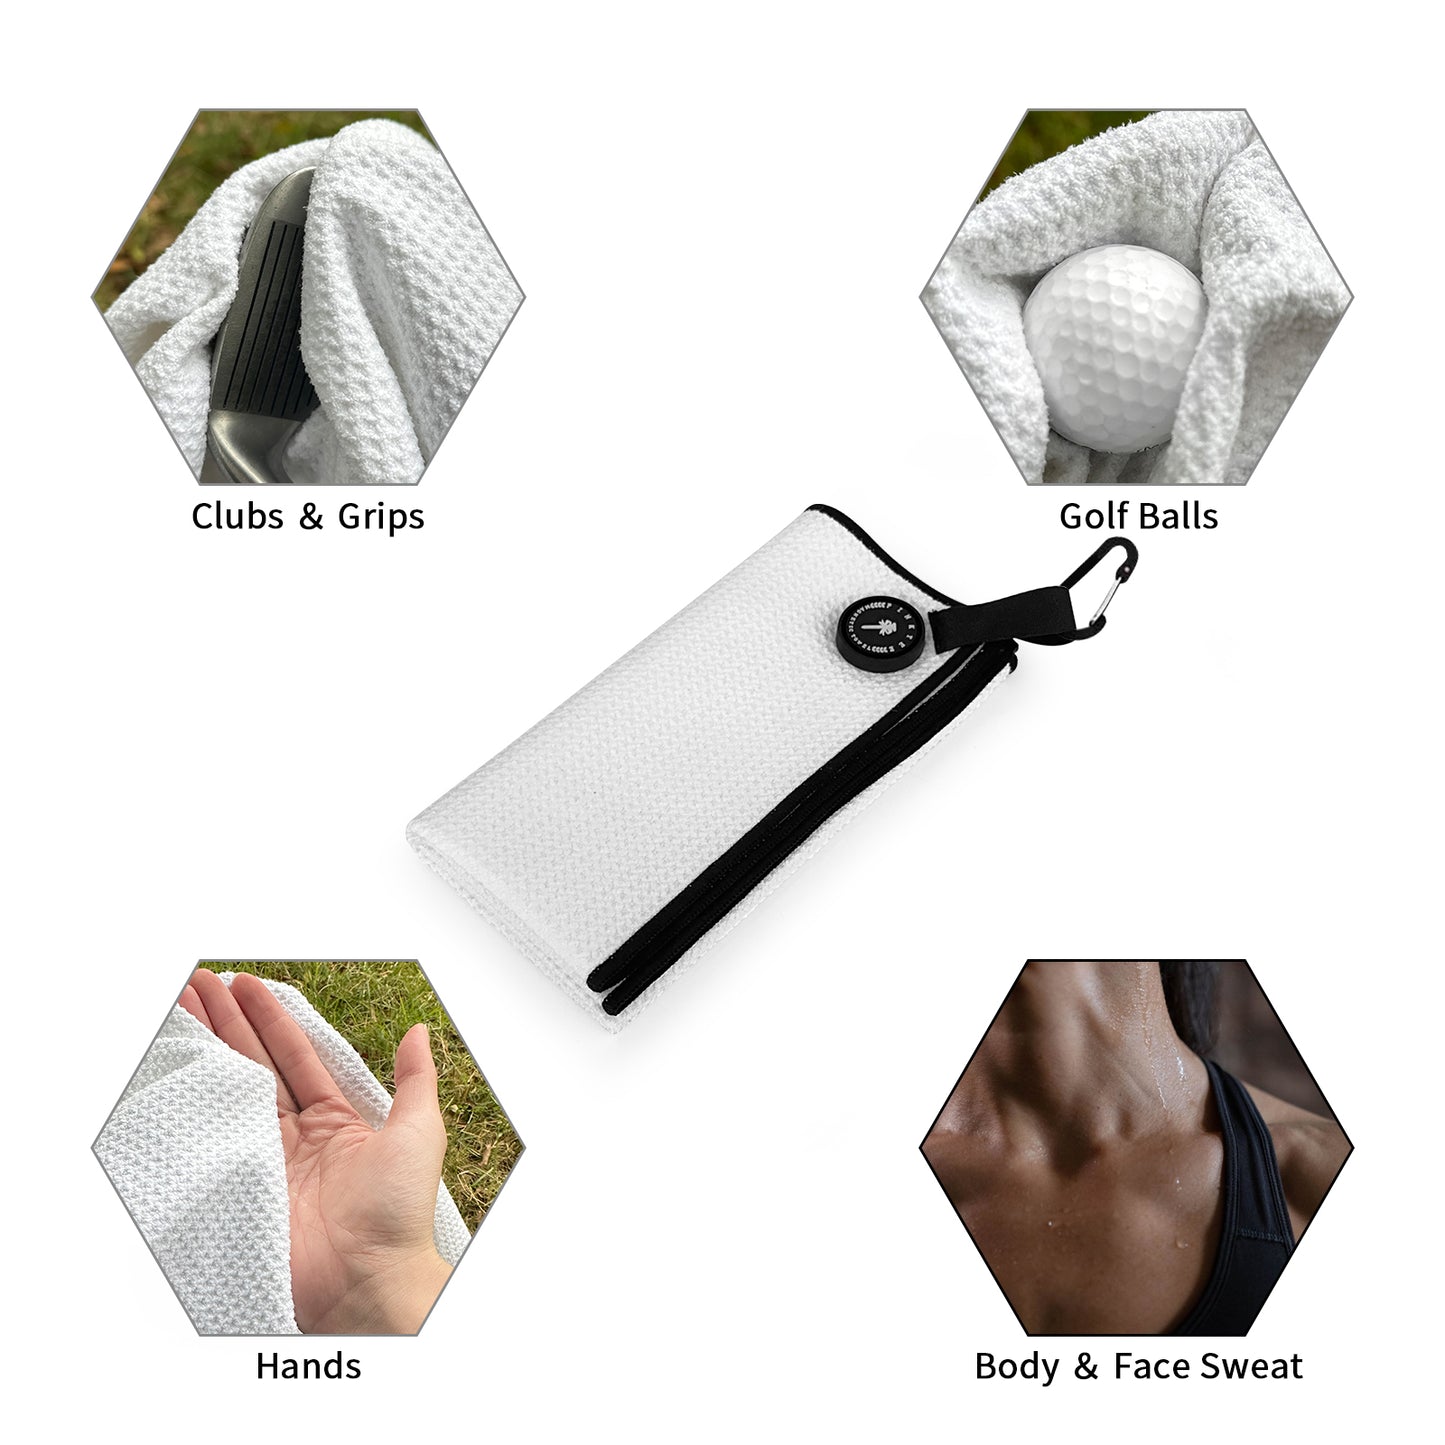 Magnetic Golf Towel, White 18x18'' Microfiber Golf Towel Golf Gifts for Men Women Strong Hold to Golf Carts or Clubs